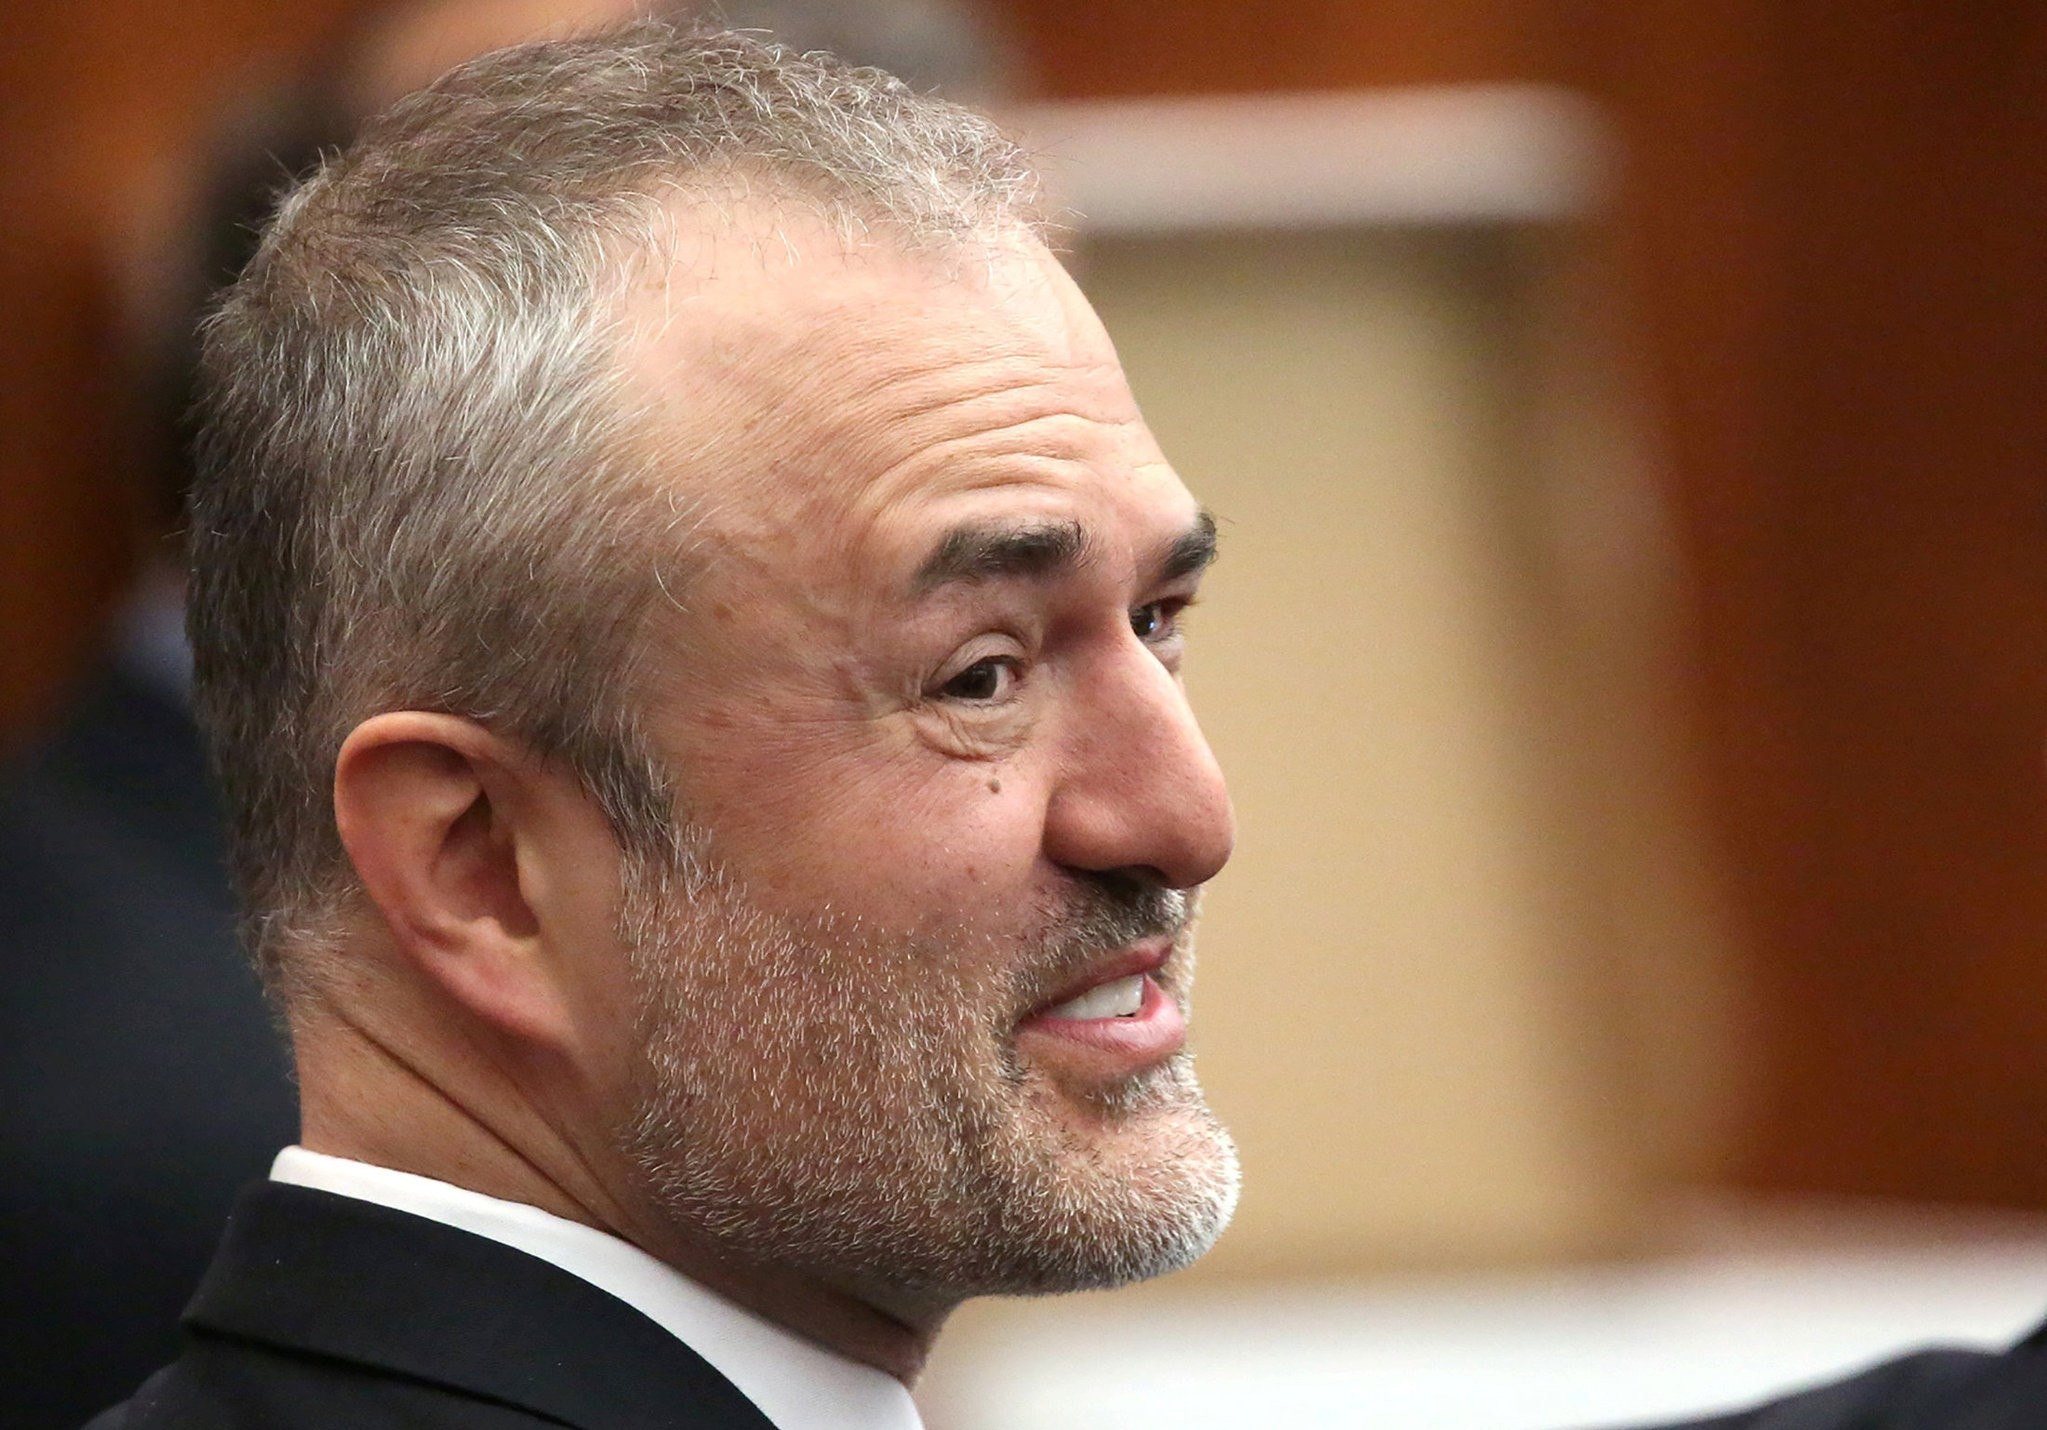 Nick Denton, founder of Gawker, talks with his legal team before Terry Bollea, also known as Hulk Hogan, testifies in court, in United States, March 8, 2016. (REUTERS Photo)